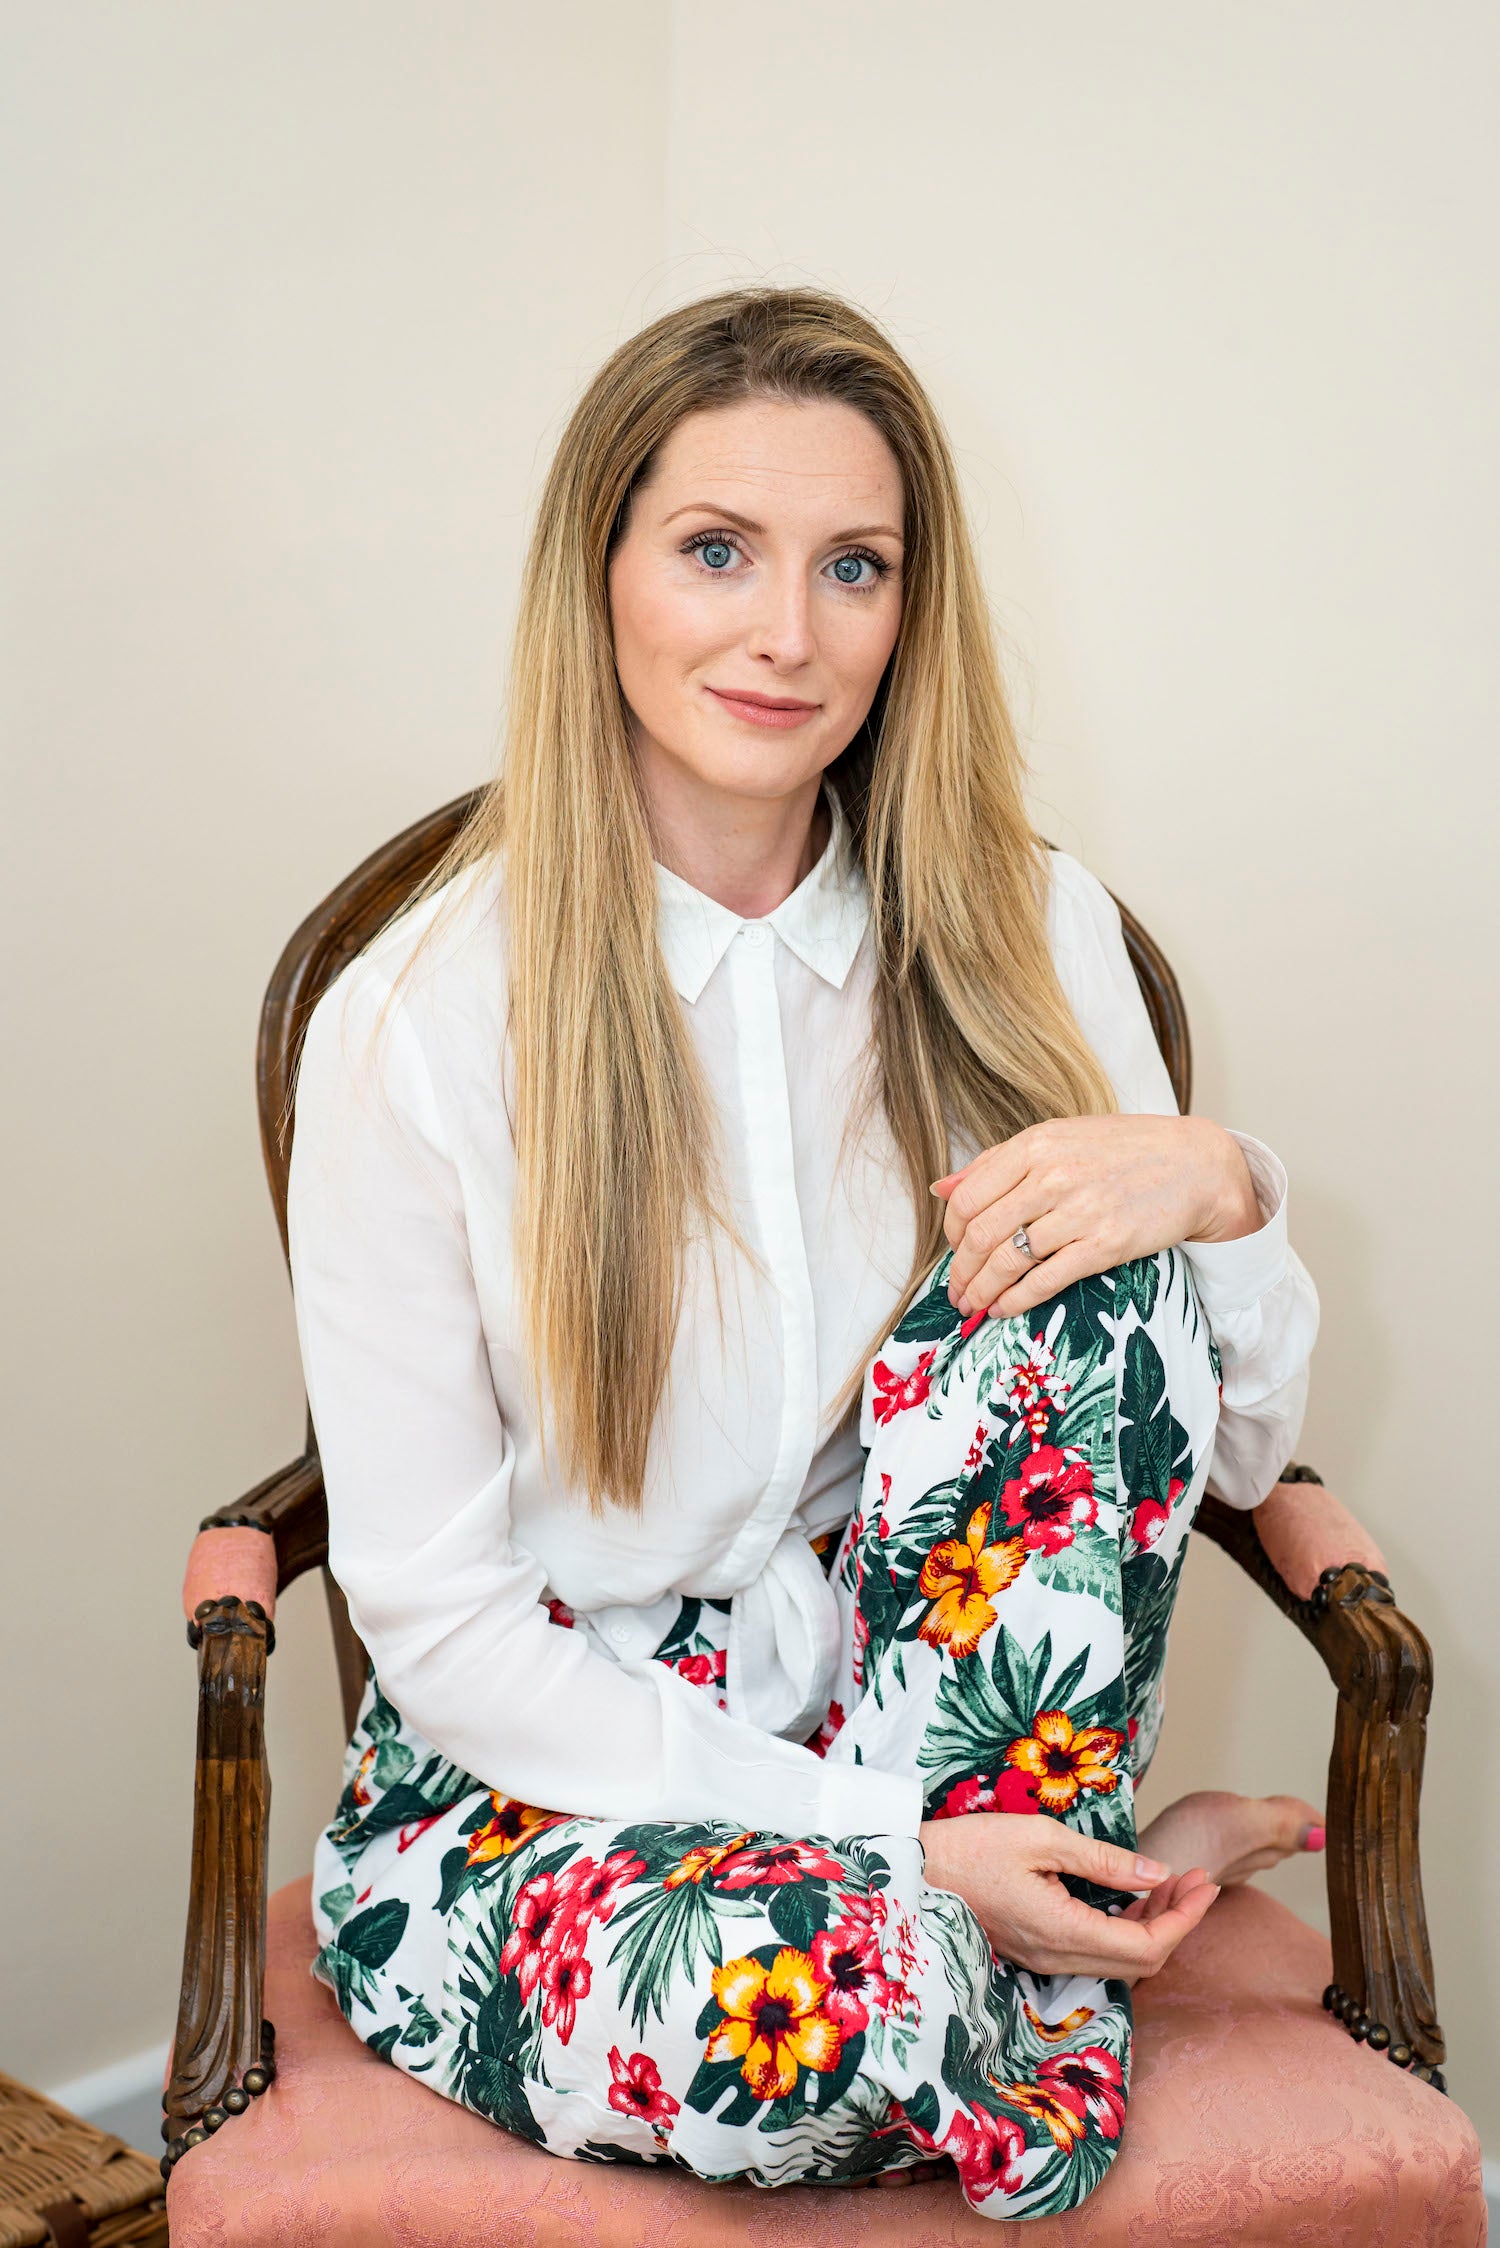 Bowe Organics Founder Diane Bowe. Diane is sitting on a wood chair with pink upholstery. Her long blonde hair is down over a white collared shirt and she is wearing colourful floral trousers.